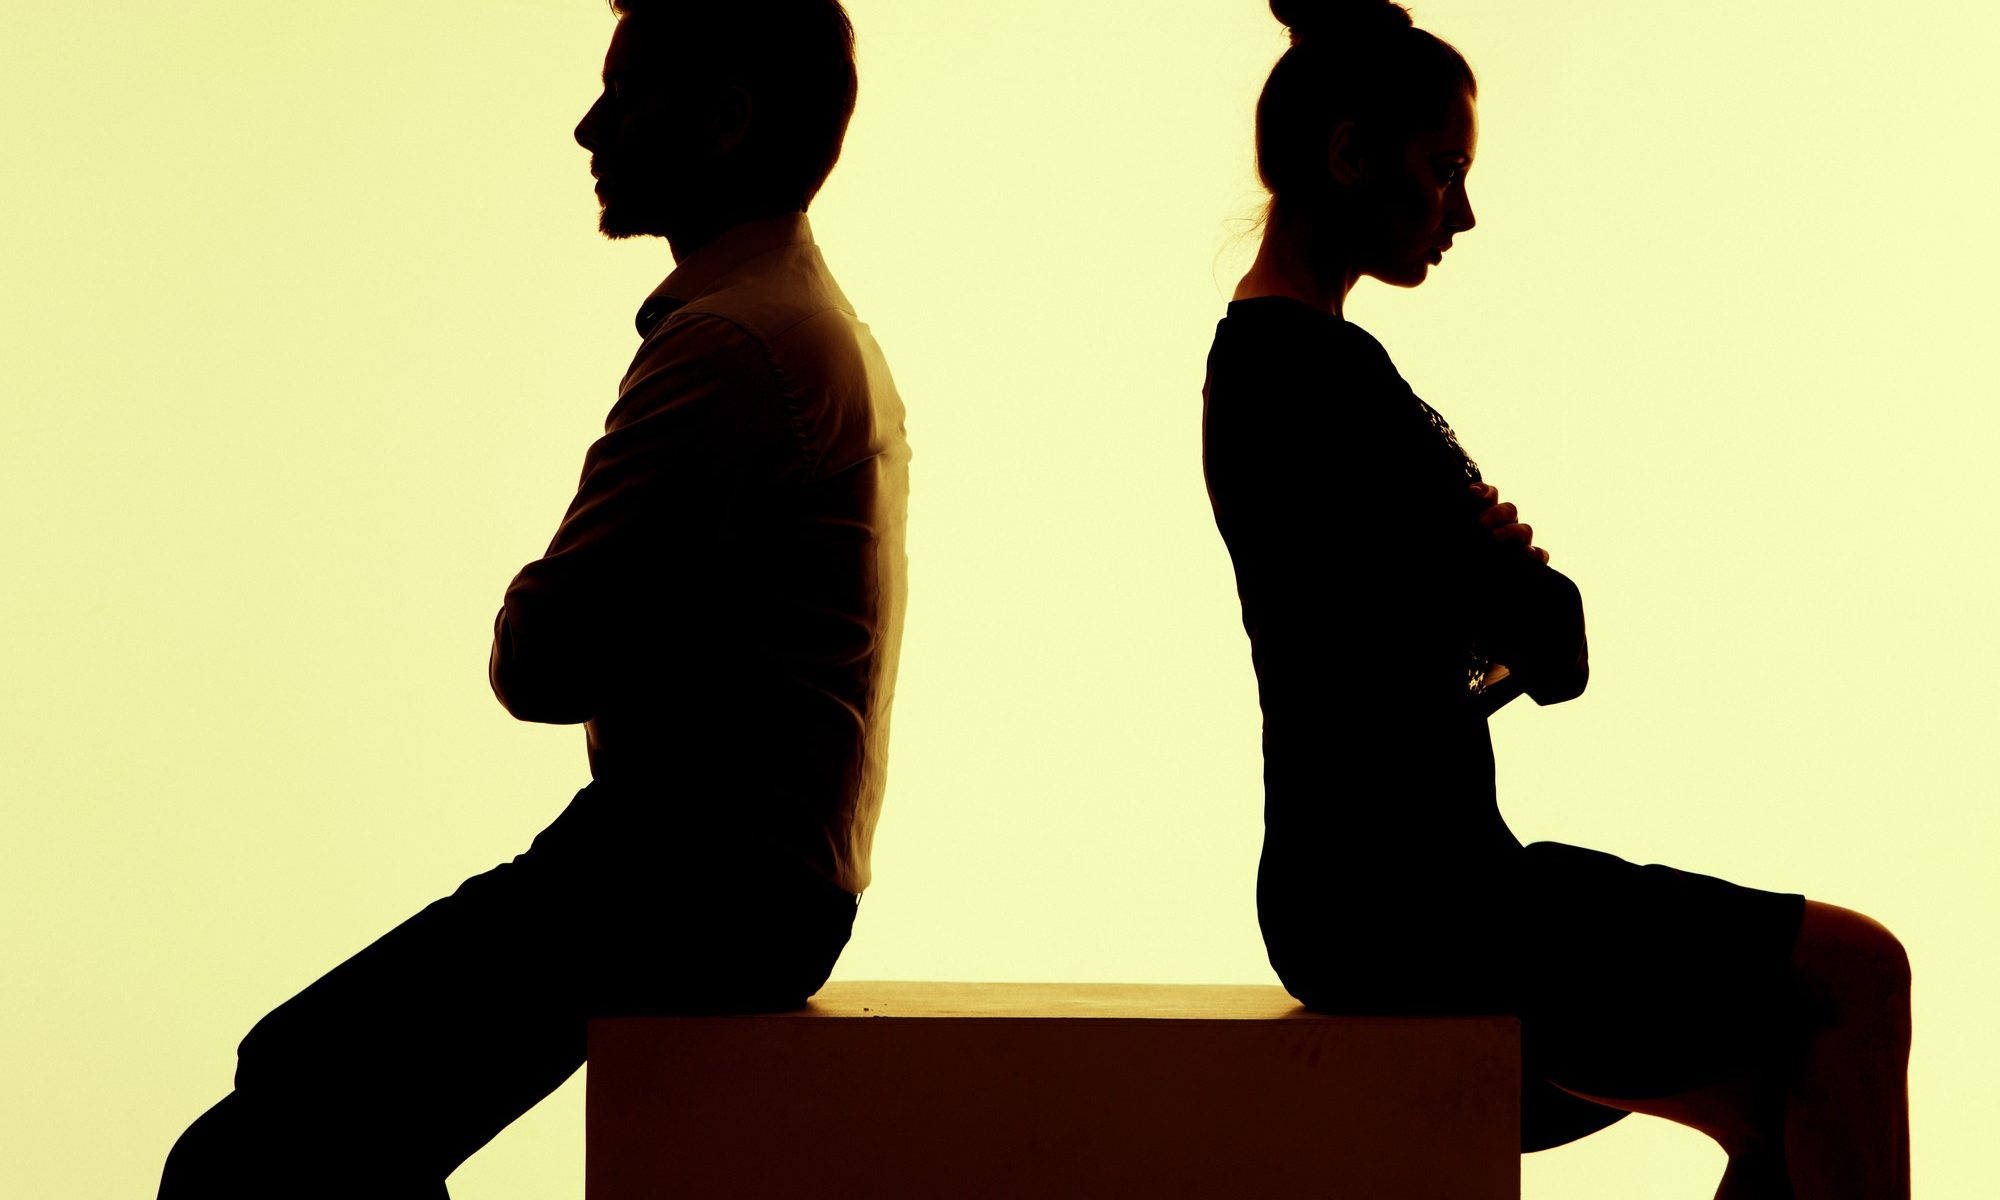 silhouette of man and woman with backs turned to one another